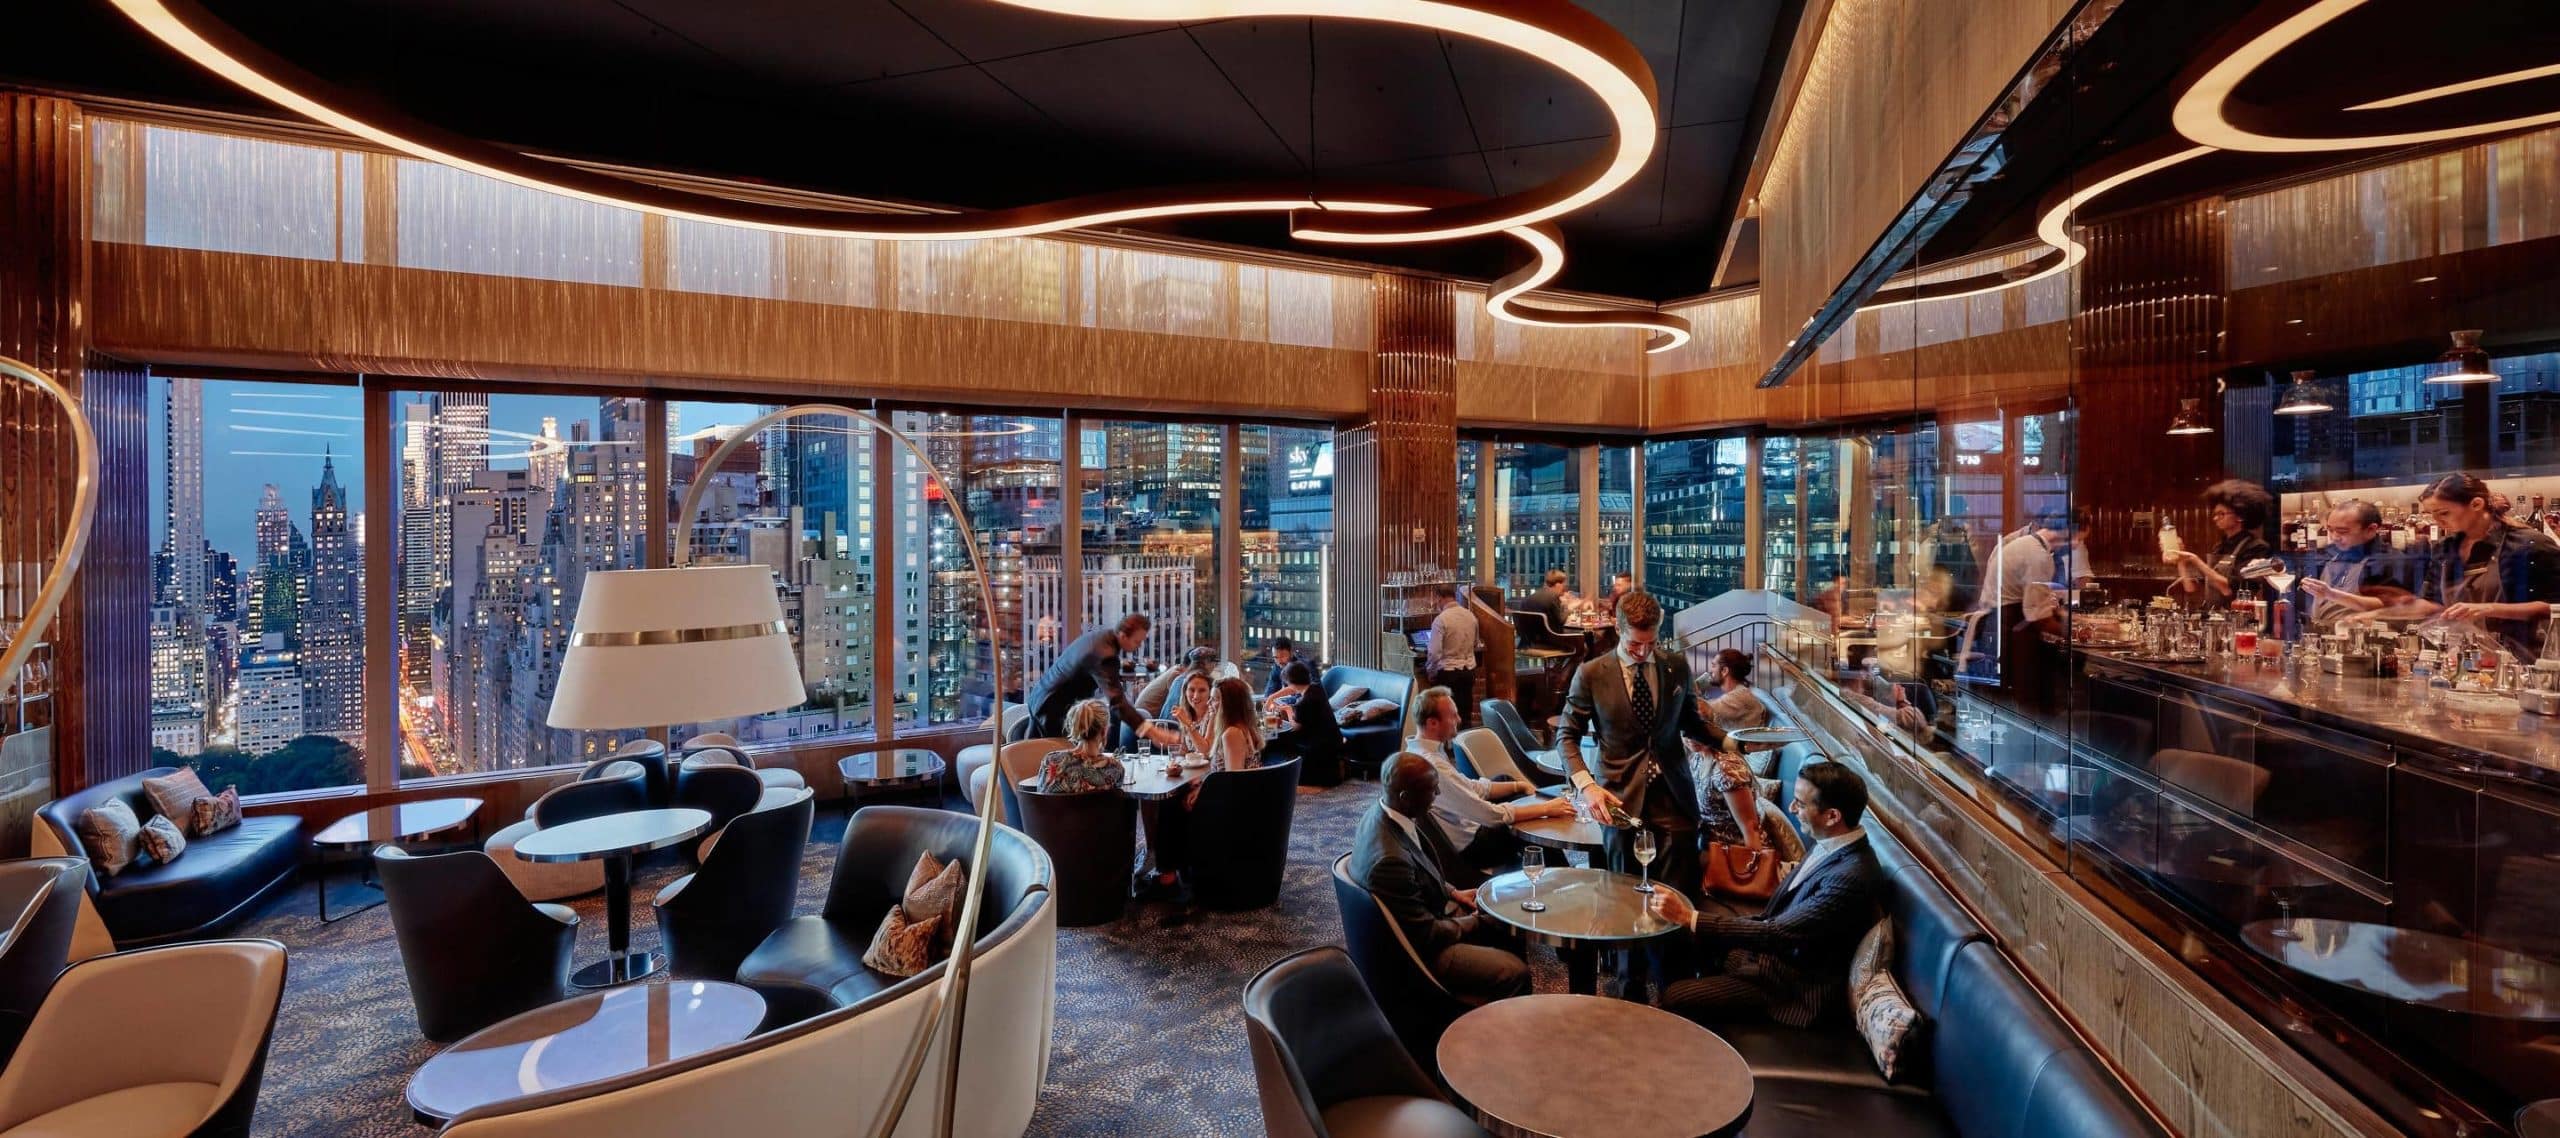 Mo Lounge NYC, best things to do in new york city in winter